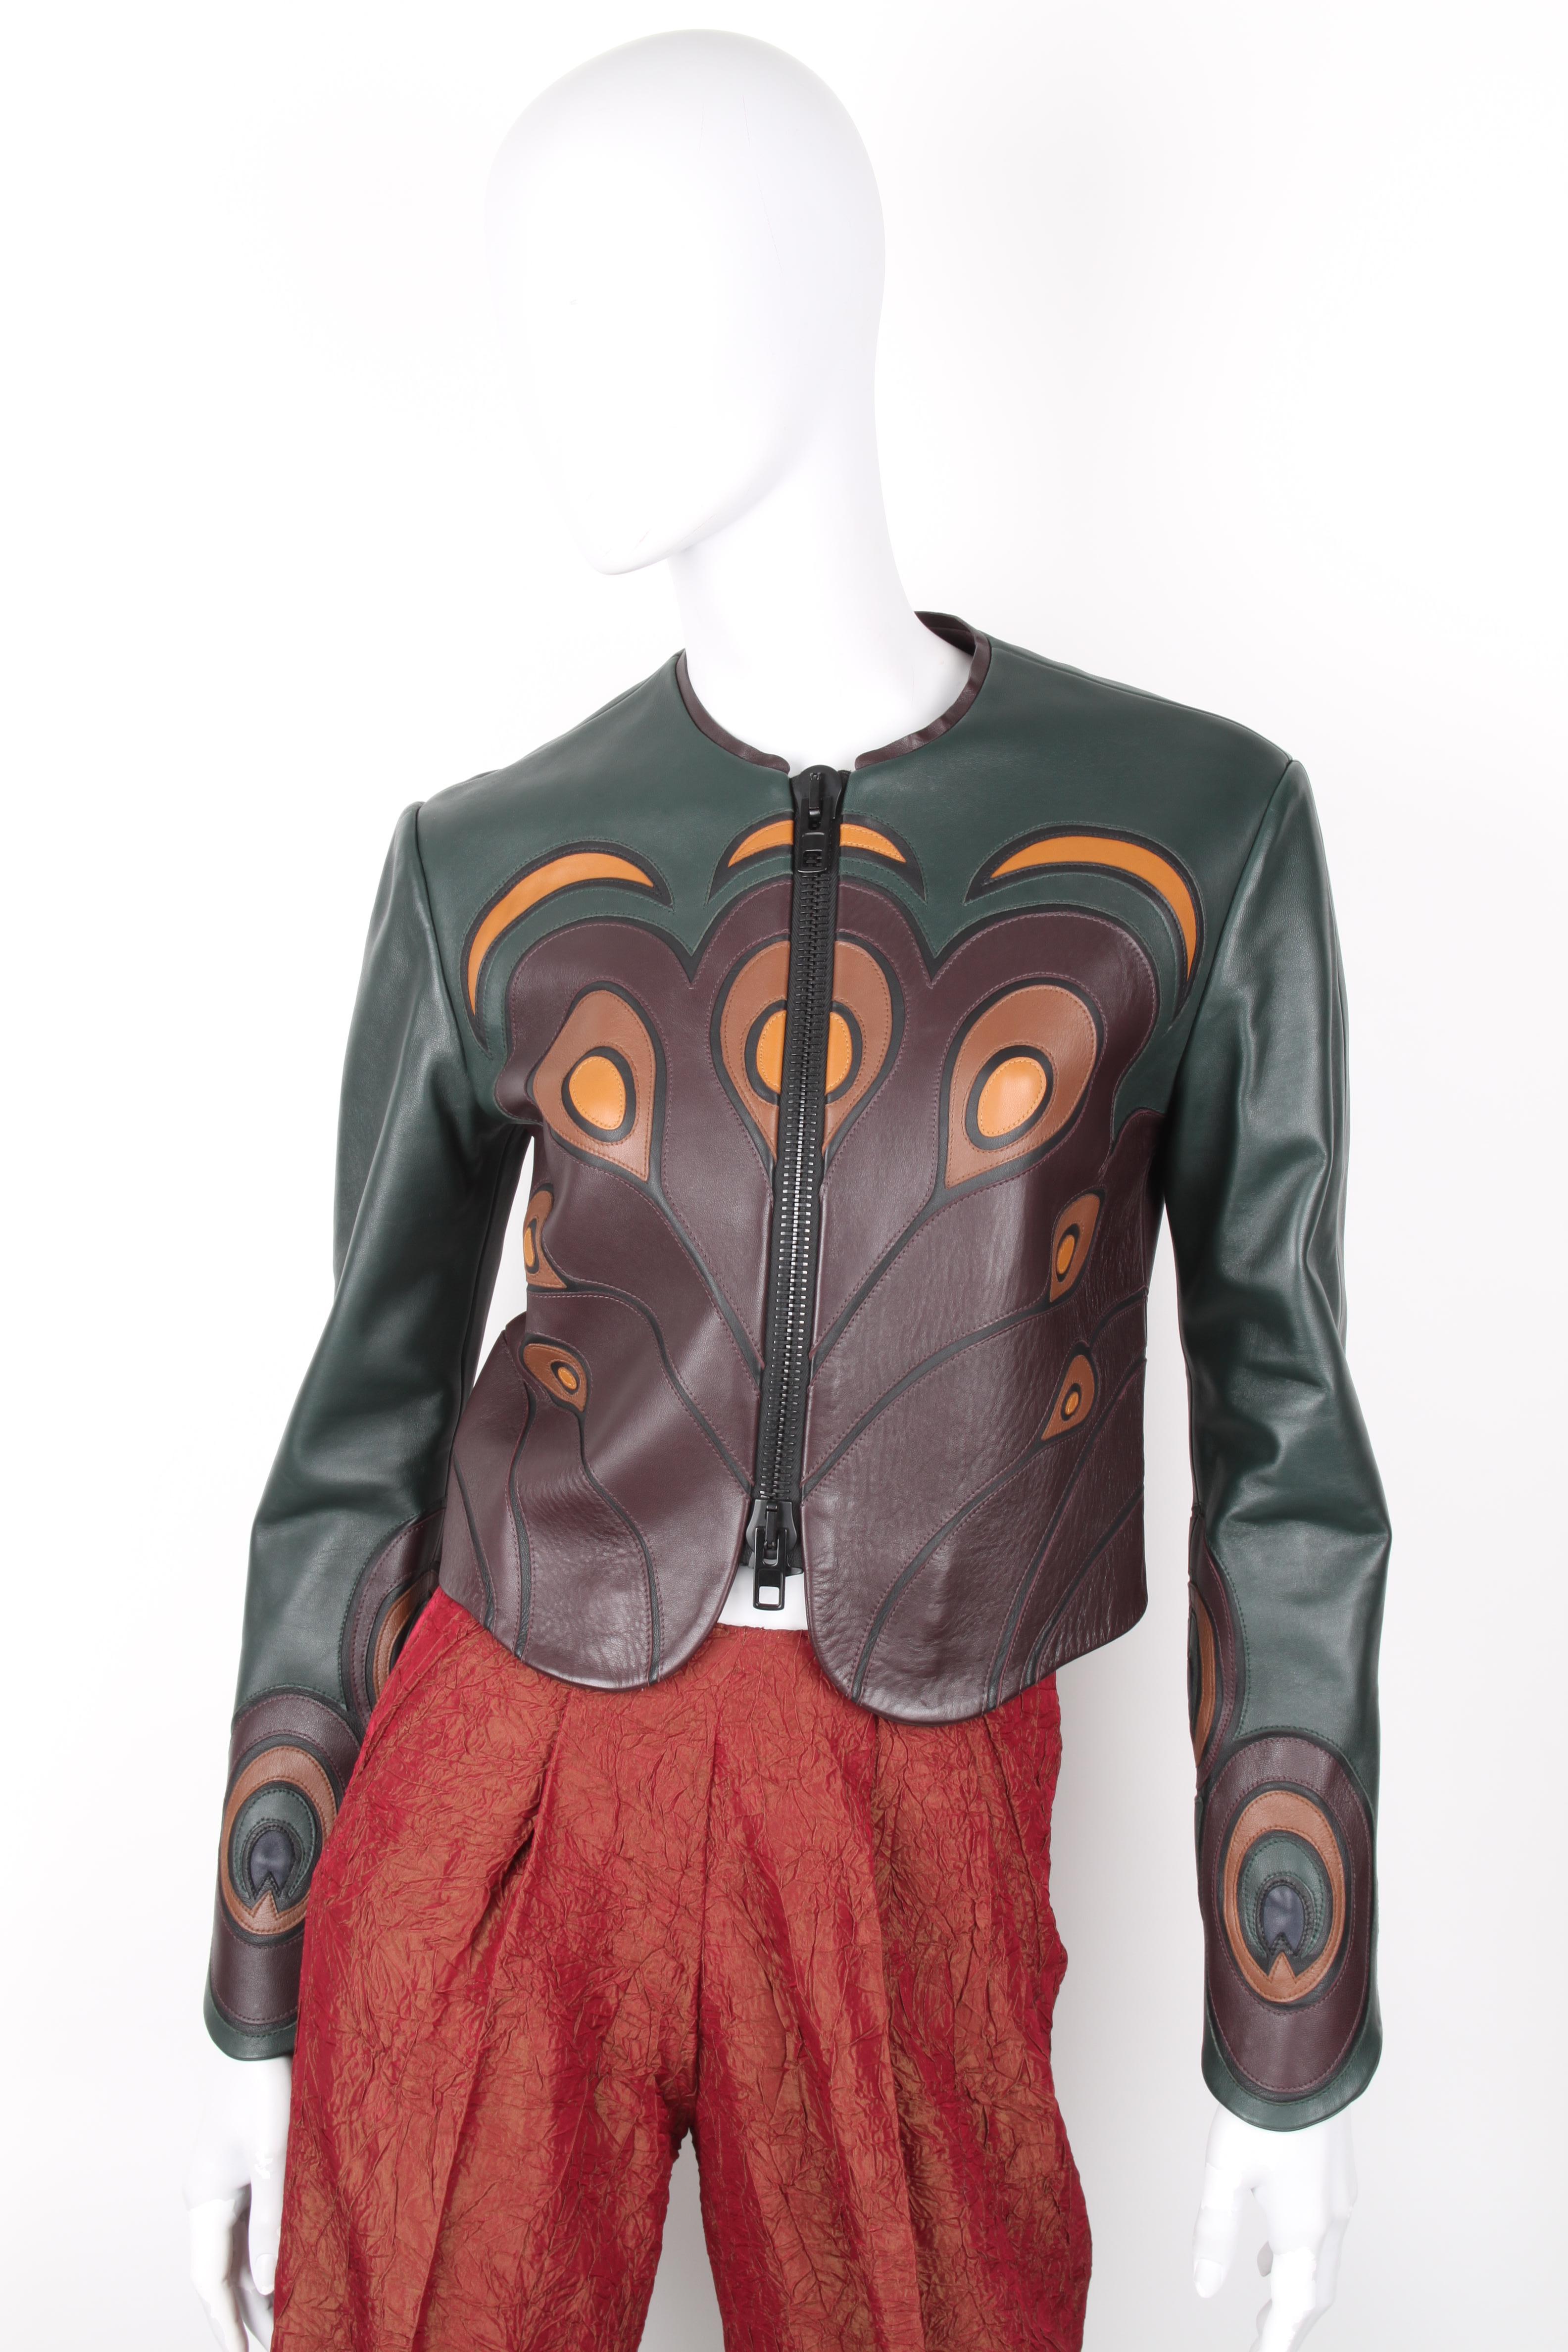 Givenchy peacock feather appliqué jacke.

Green and brown lambskin peacock feather applique jacket from Givenchy featuring a round neck, a front zip fastening, long sleeves and a scalloped hem.

Measurements: L: 45 cm / 17,5 in / 41 cm / 16